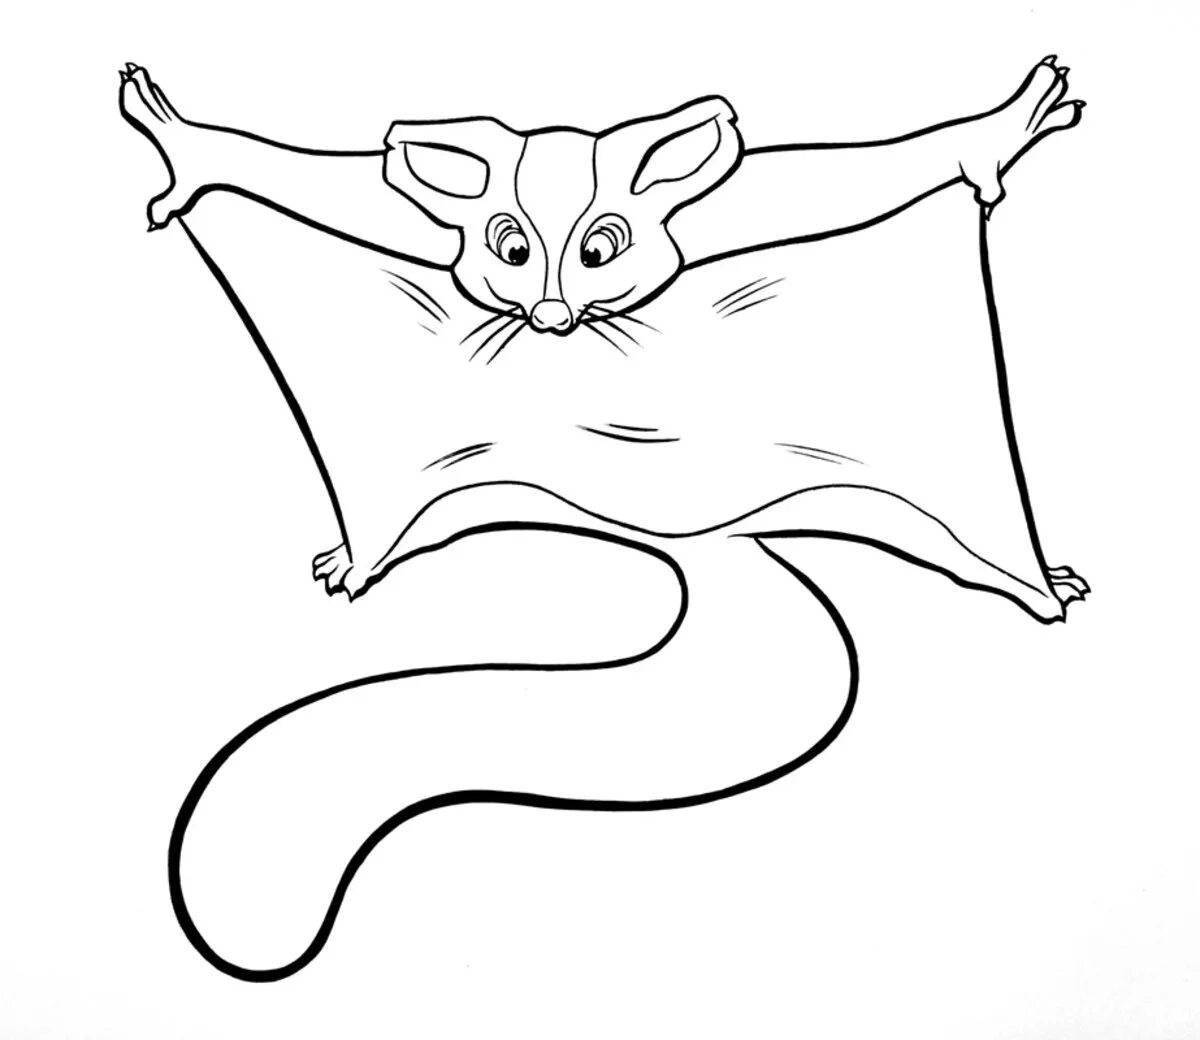 Incredible flying squirrel coloring book